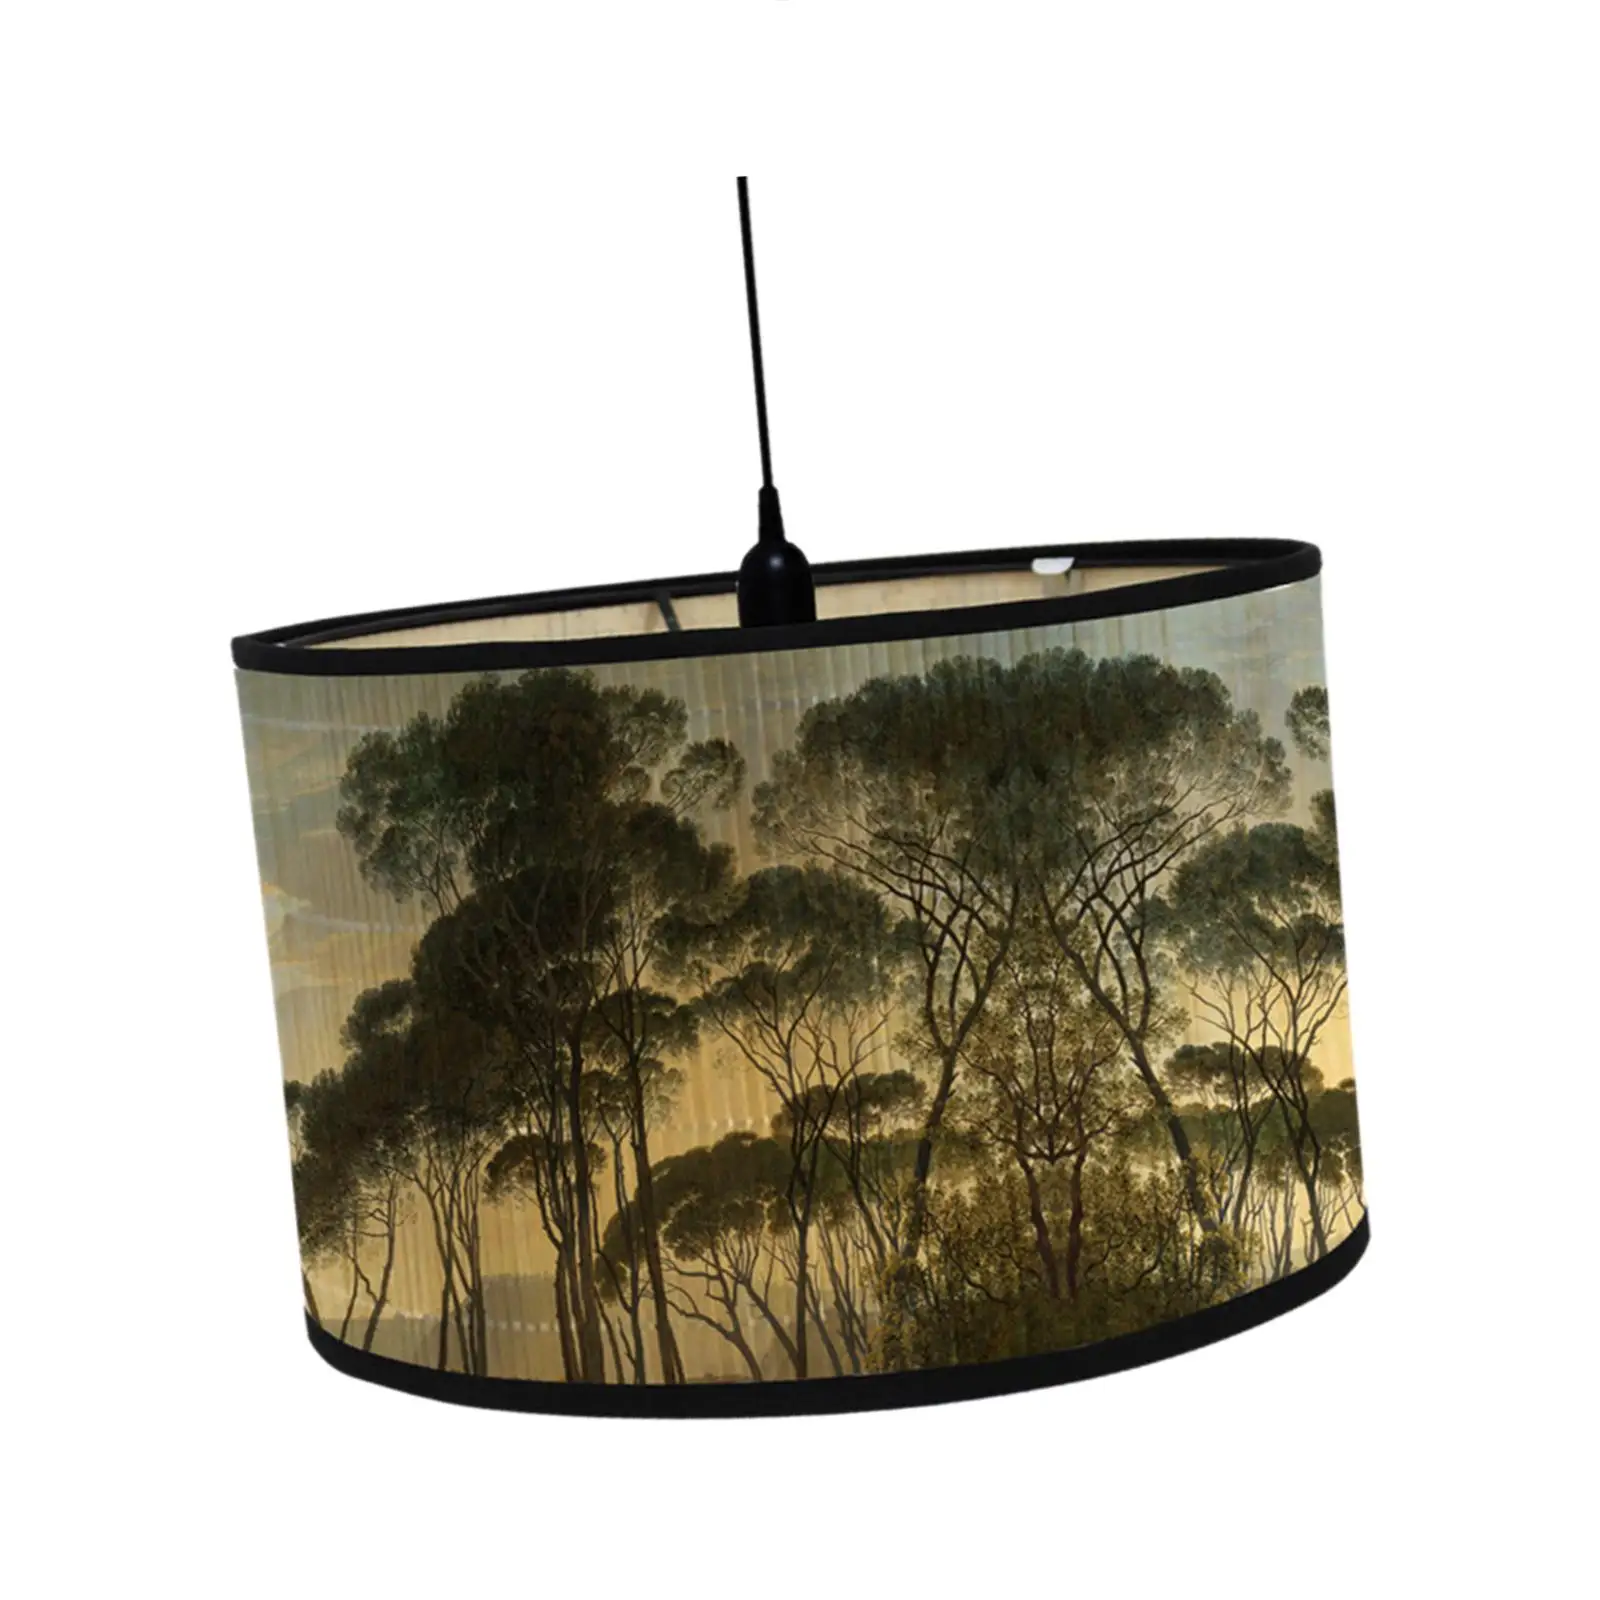 Drum Print Lamp Shade Light Cover 11.8x11.8x8 inch E27 Bamboo Lampshade Cover Drum Shaped Lamp Shades for Table Ceiling Floor